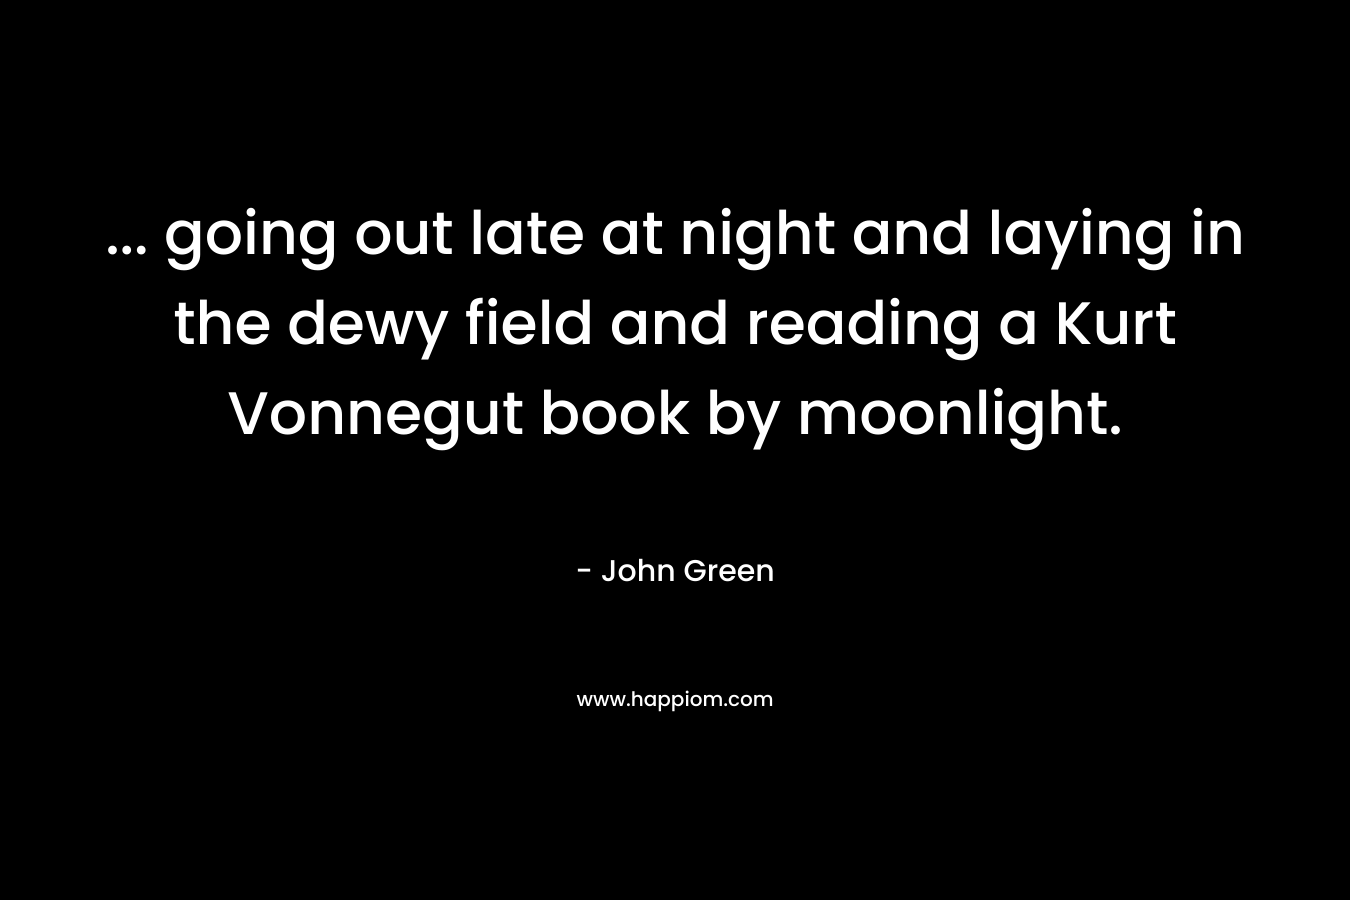 … going out late at night and laying in the dewy field and reading a Kurt Vonnegut book by moonlight. – John Green